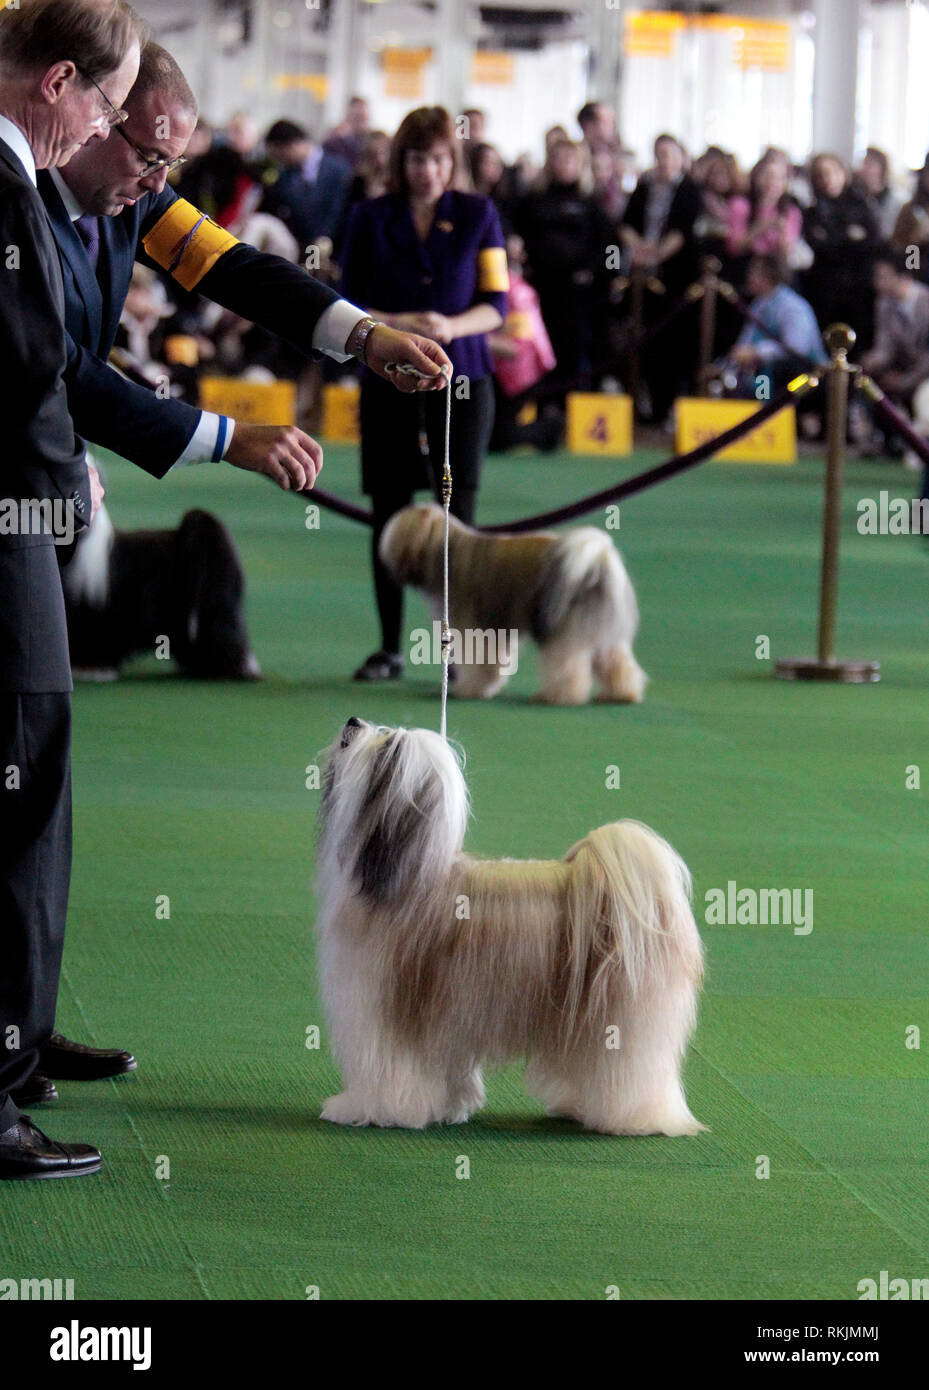 New York, United States. 11th Feb, 2019. Westminster Dog Show - New York City, 11 February, 2019: A Tibetan Terrier, GCHB CH Dreammaker Salishan Starry Starry Night, during the Best of Breed Competition at the 143rd Annual Westminster Dog Show in New York City. Credit: Adam Stoltman/Alamy Live News Stock Photo